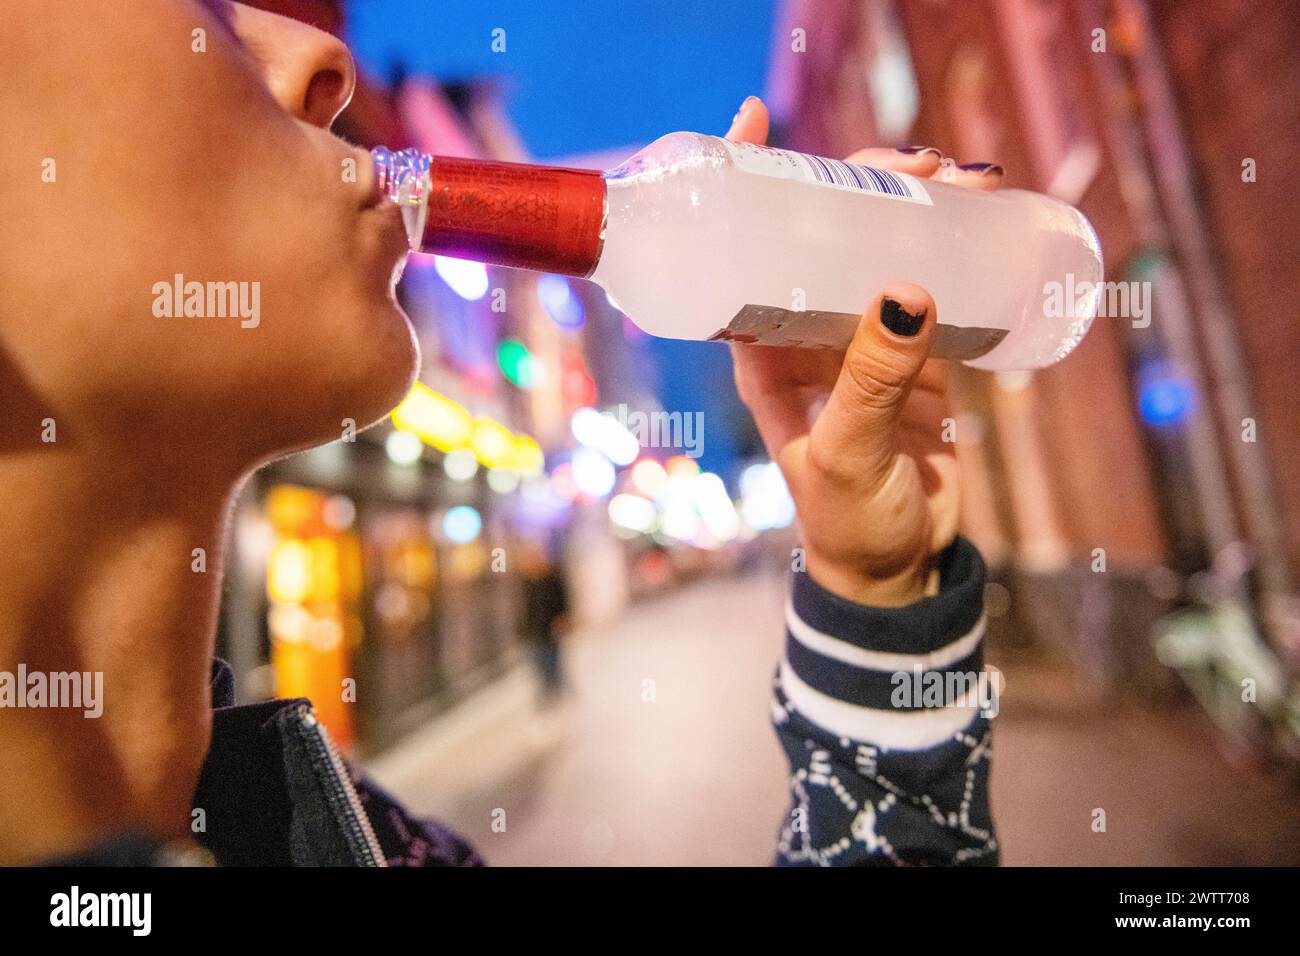 Quenching thirst with a cold drink on a lively city street at dusk. Stock Photo